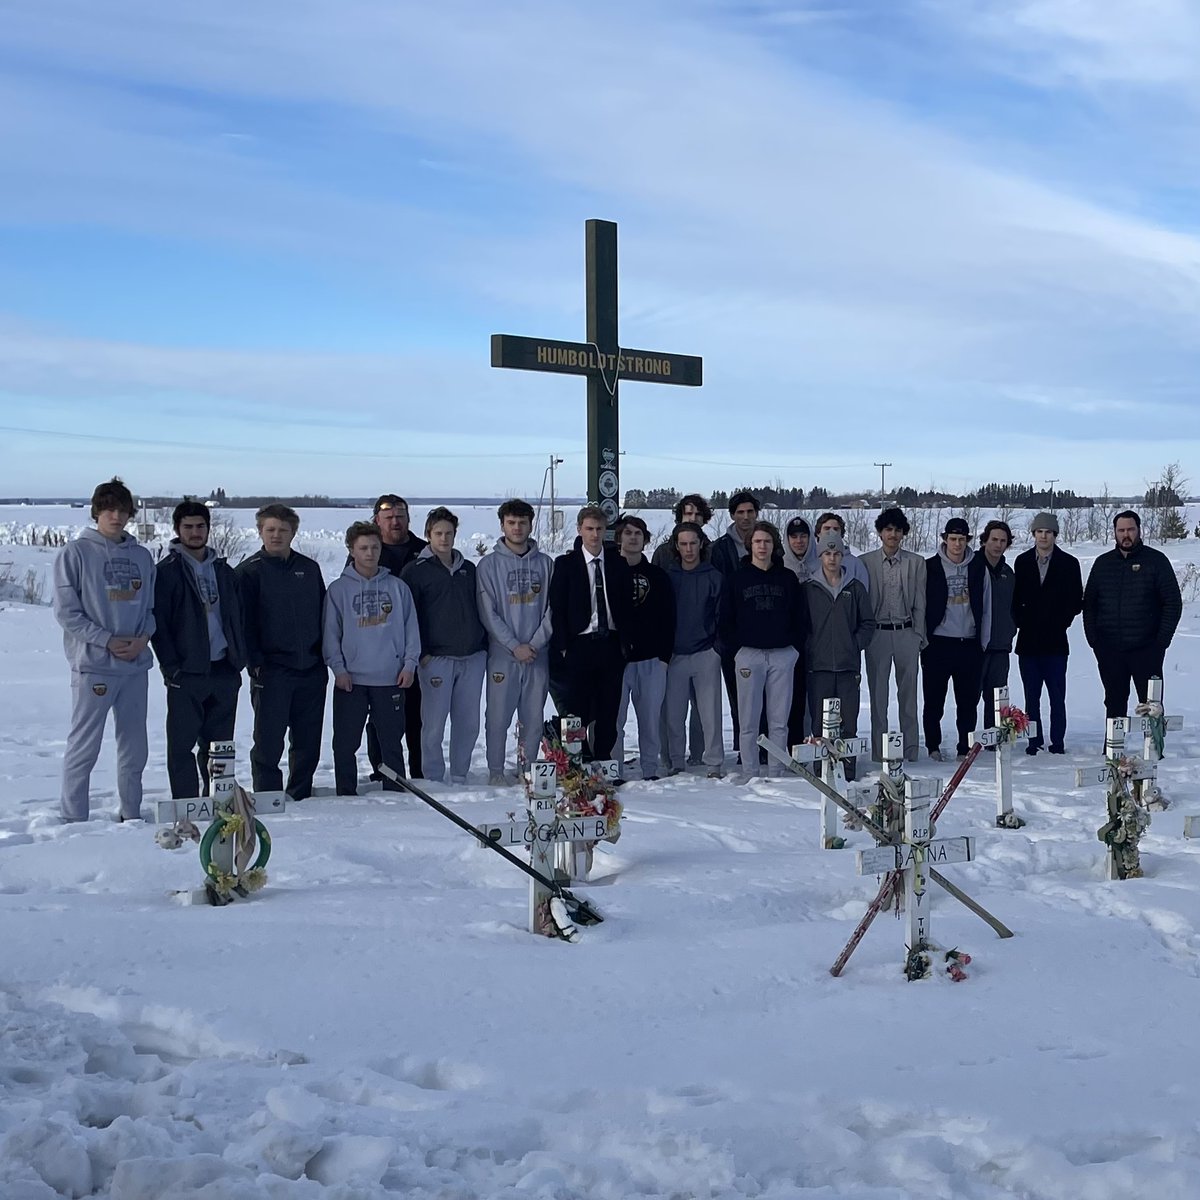 The Bears paid respects at the Humboldt Broncos crash site today. #AlwaysInOurHearts 💛💚